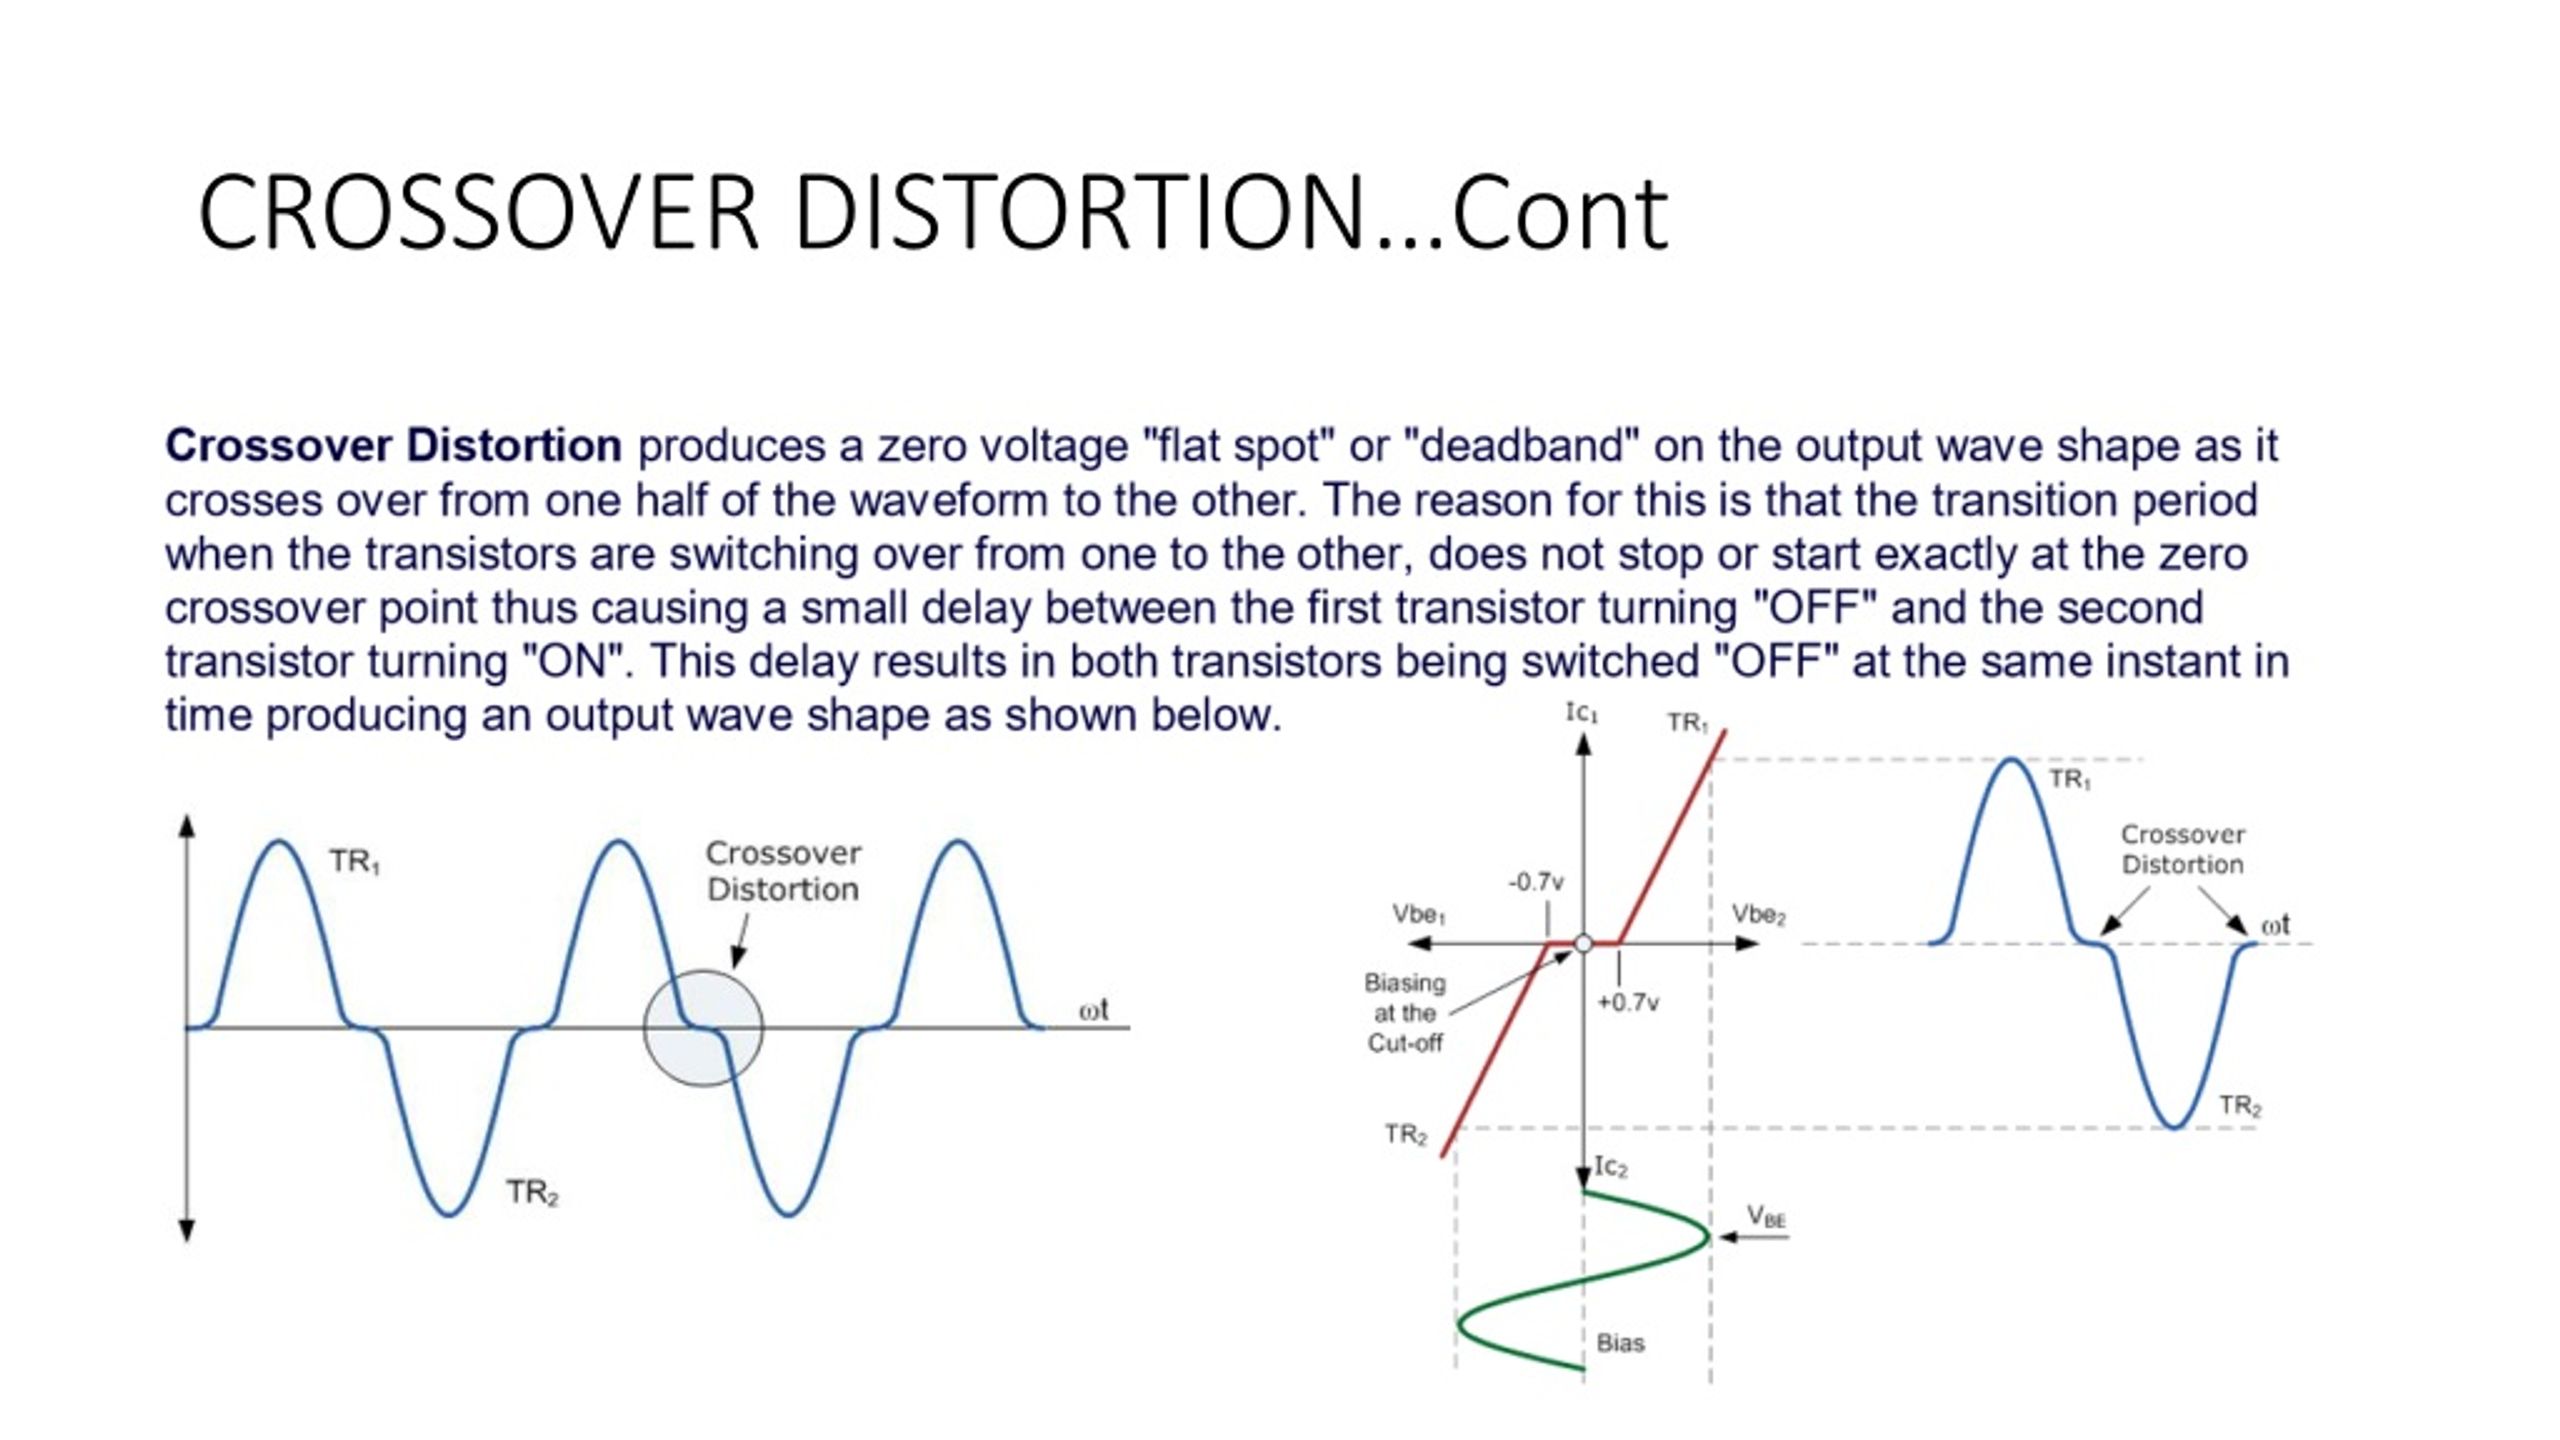 PPT POWER AMPLIFIERS… Cont PowerPoint Presentation, free download